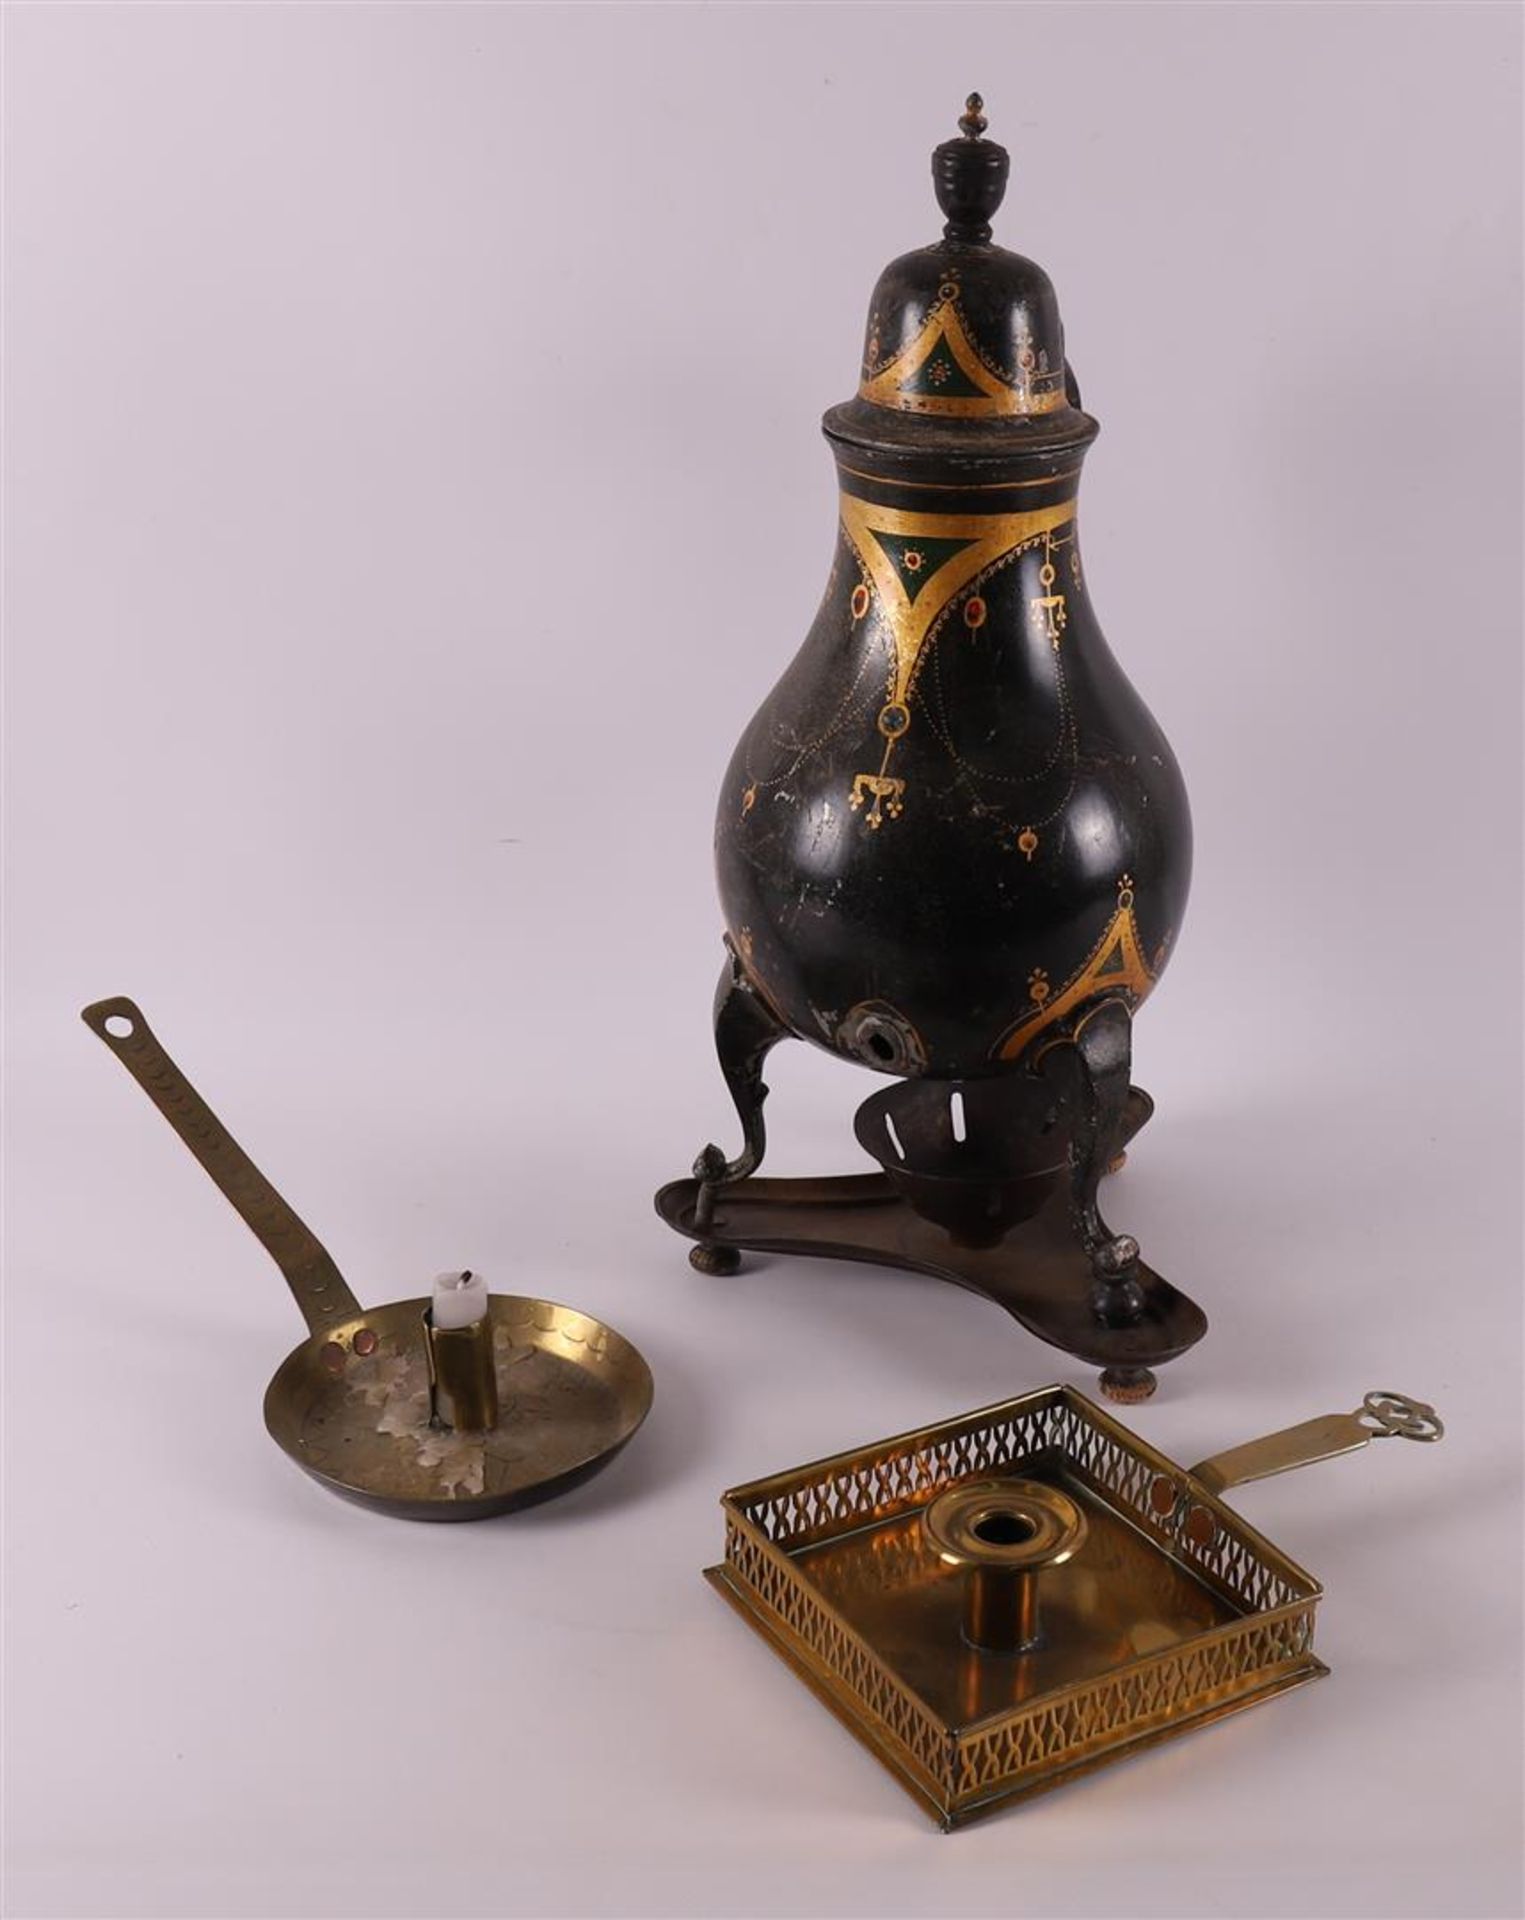 Two various brass sconces and a tap jug, 18th/19th century.